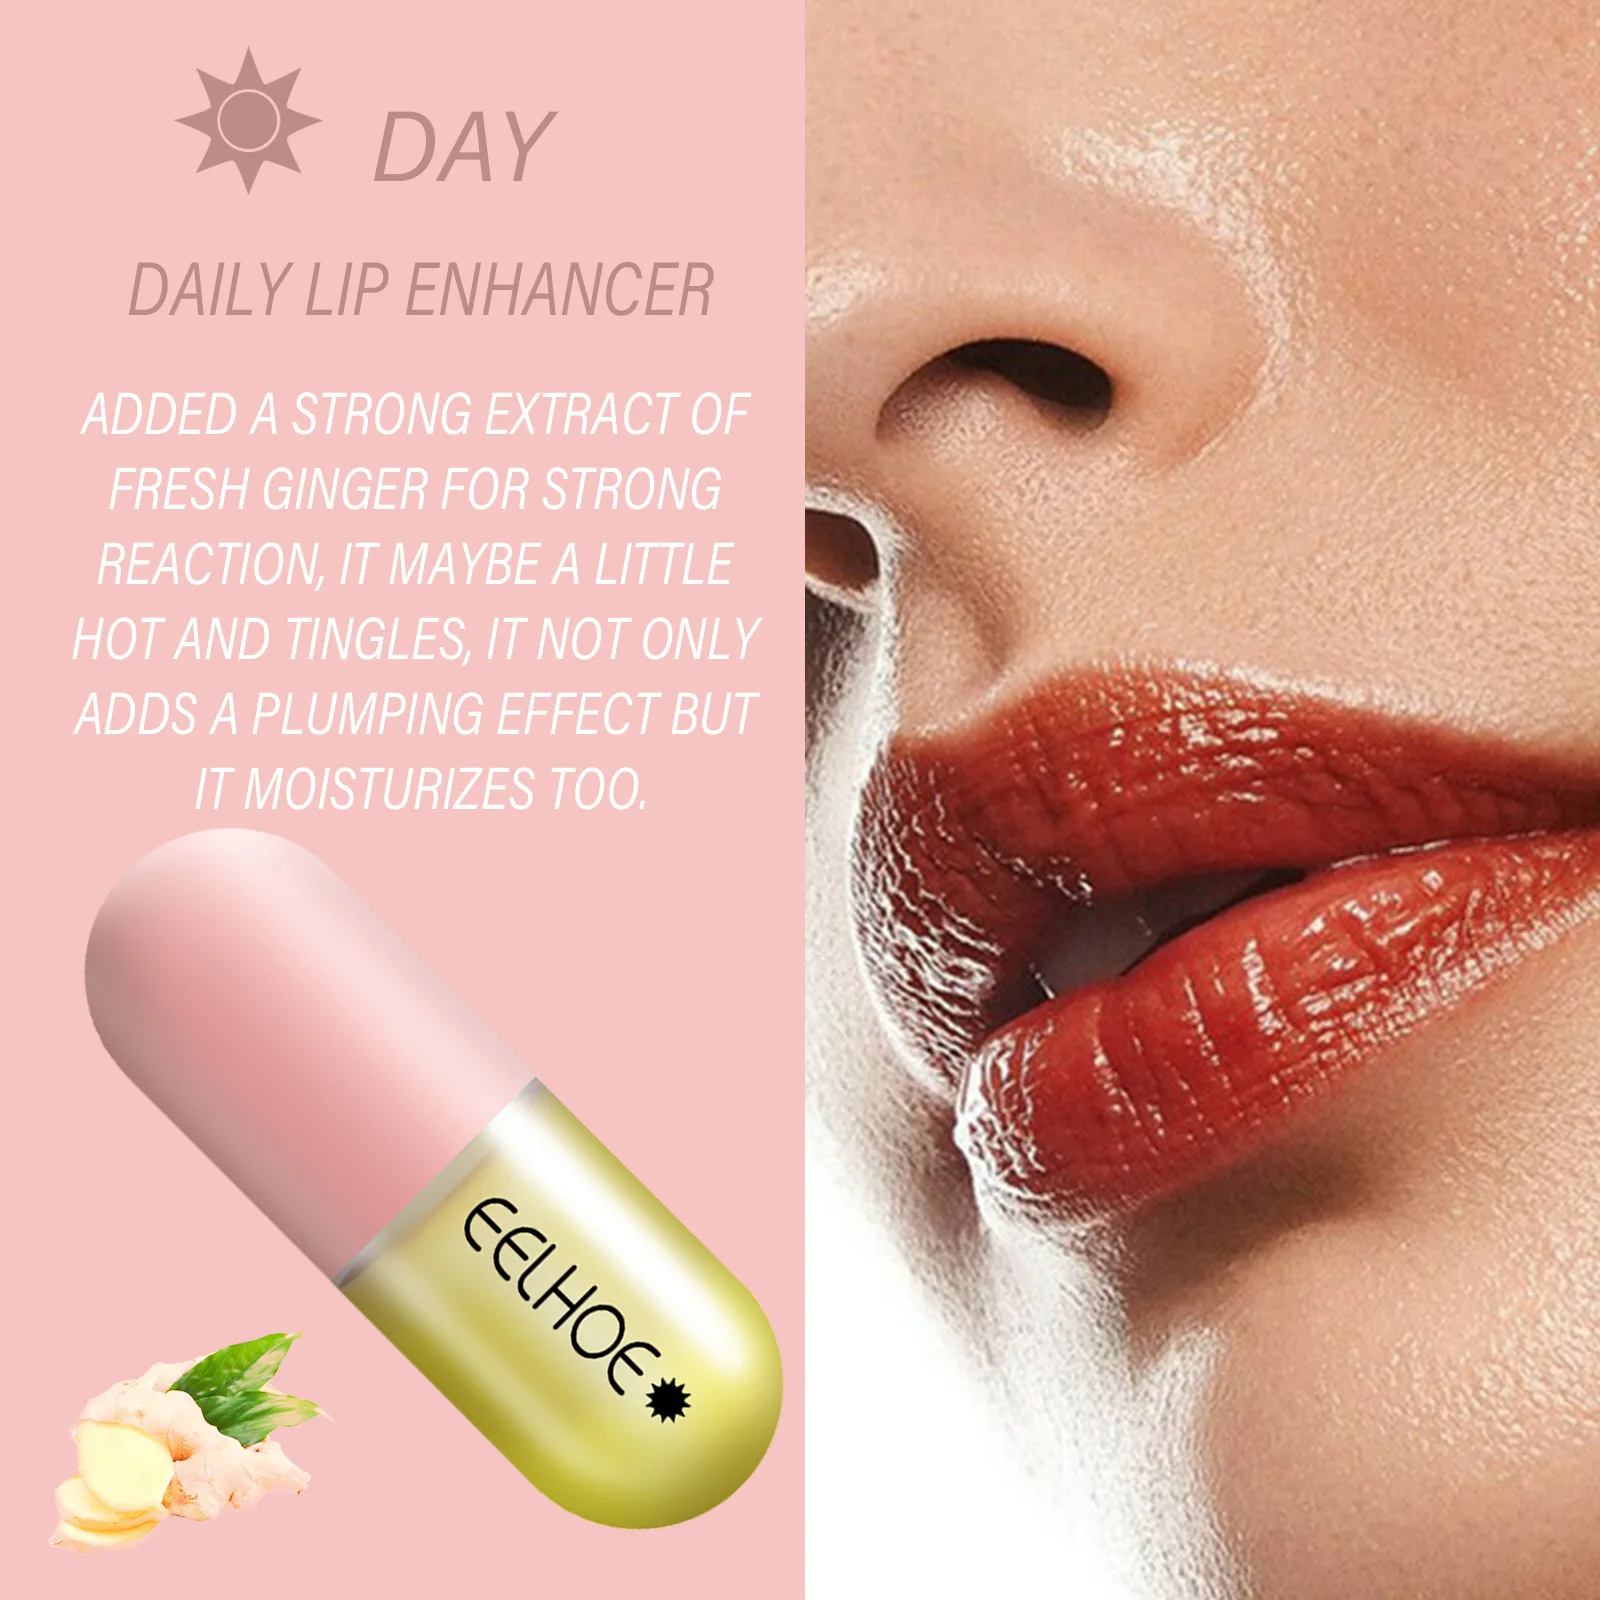 Make Your Lips Look Plump, Plump, And Hydrated With a Day And Night Moisturizing Elastic Lip Plumper Set